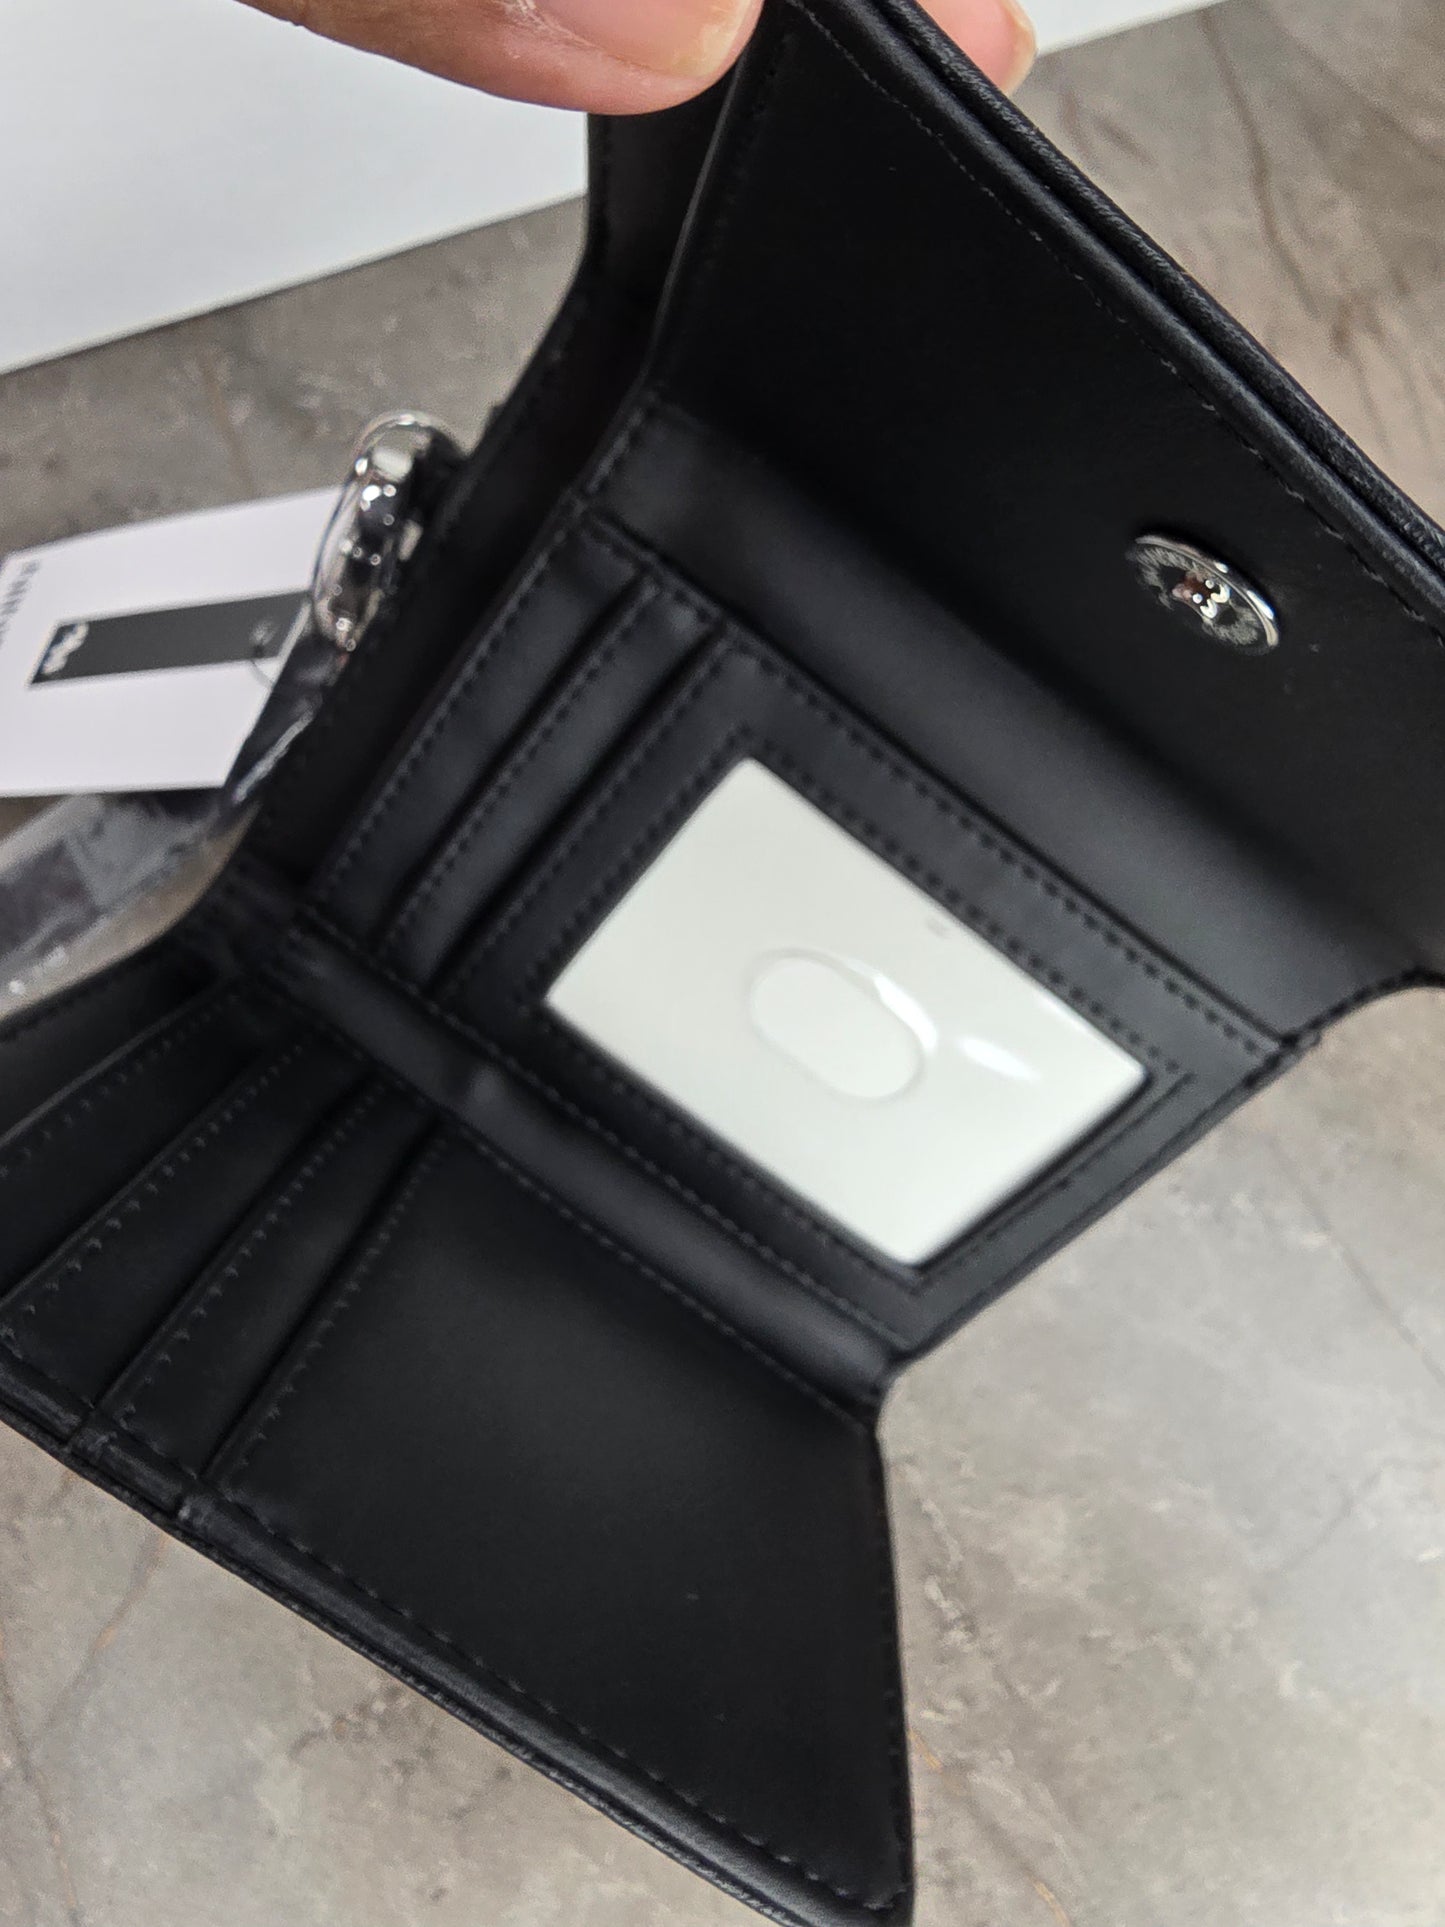 Nine West Small Wallet